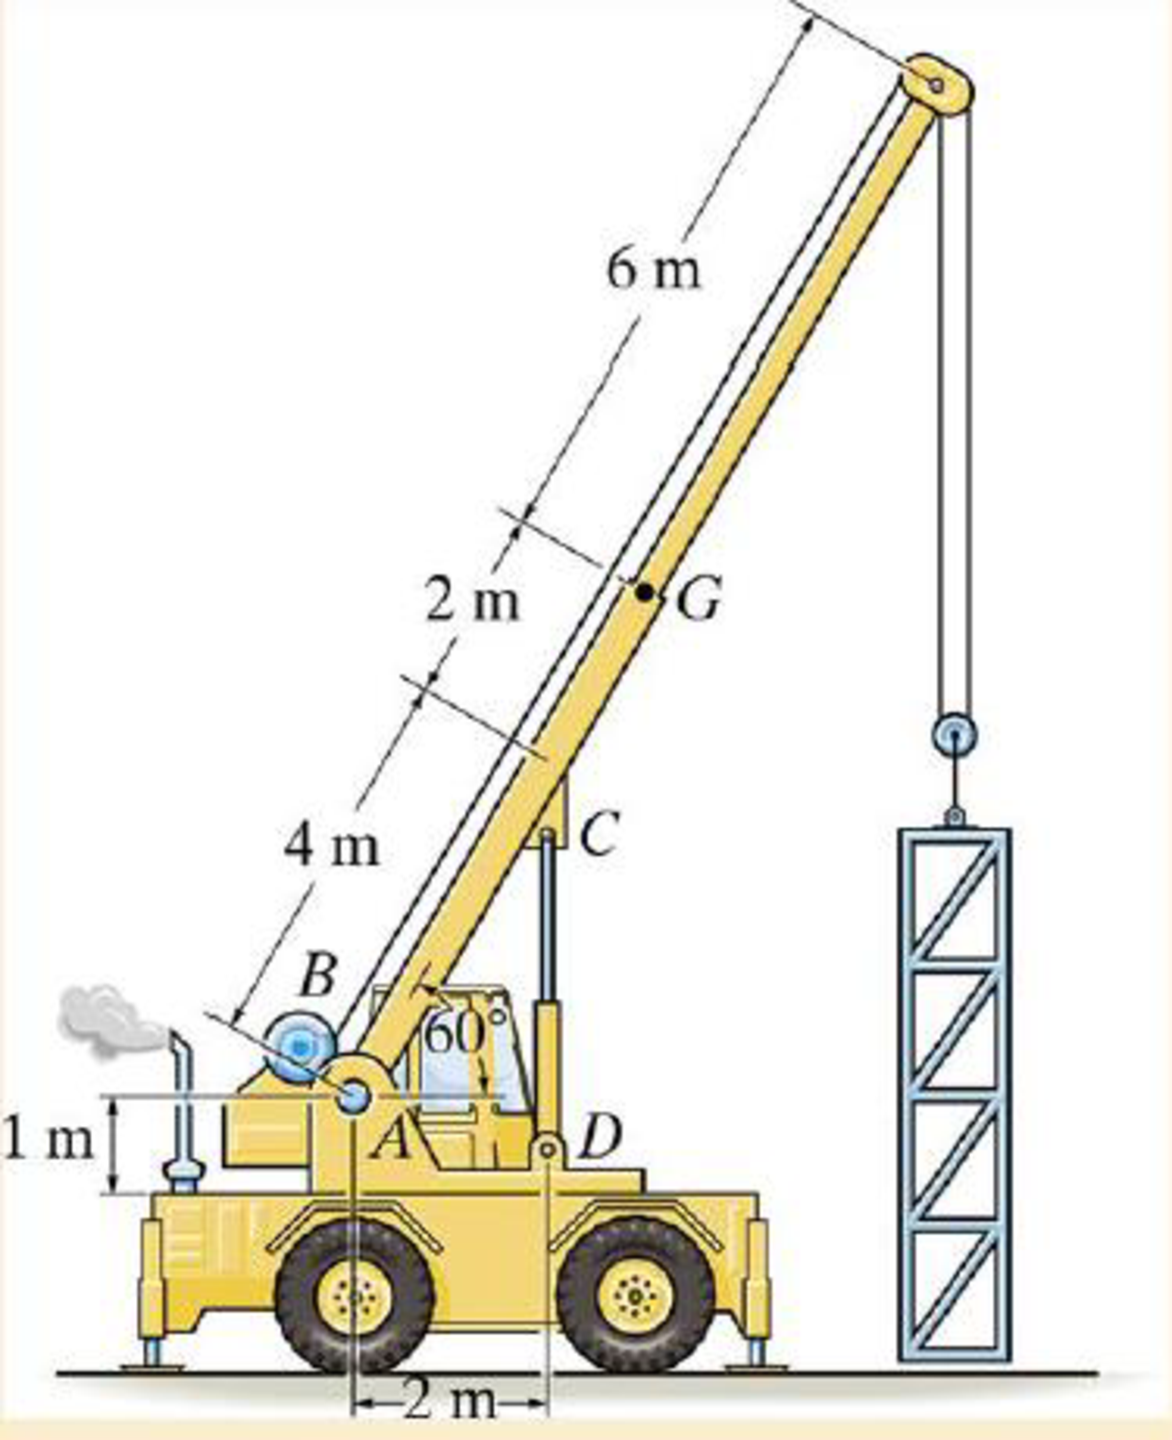 Chapter 17.3, Problem 28P, If the winch at B draws in the cable with an acceleration of 2 m/s2, determine the compressive force 